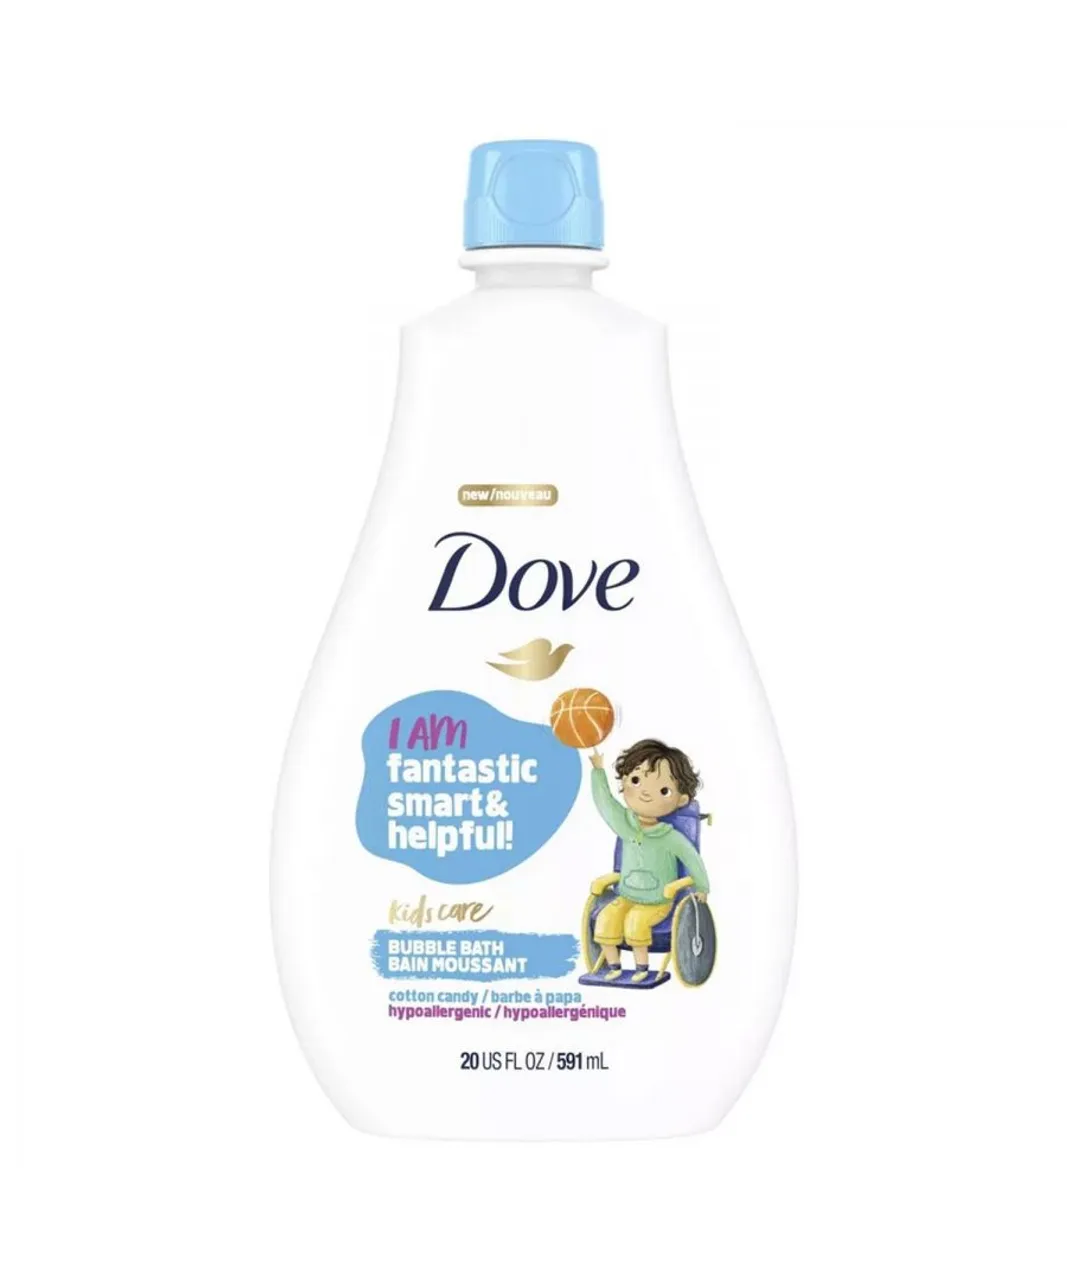 Dove Childrens Unisex Kids Care Bubble Bath Cotton Candy Hypoallergenic for Delicate Skin,2x591ml - Sky Blue - One Size